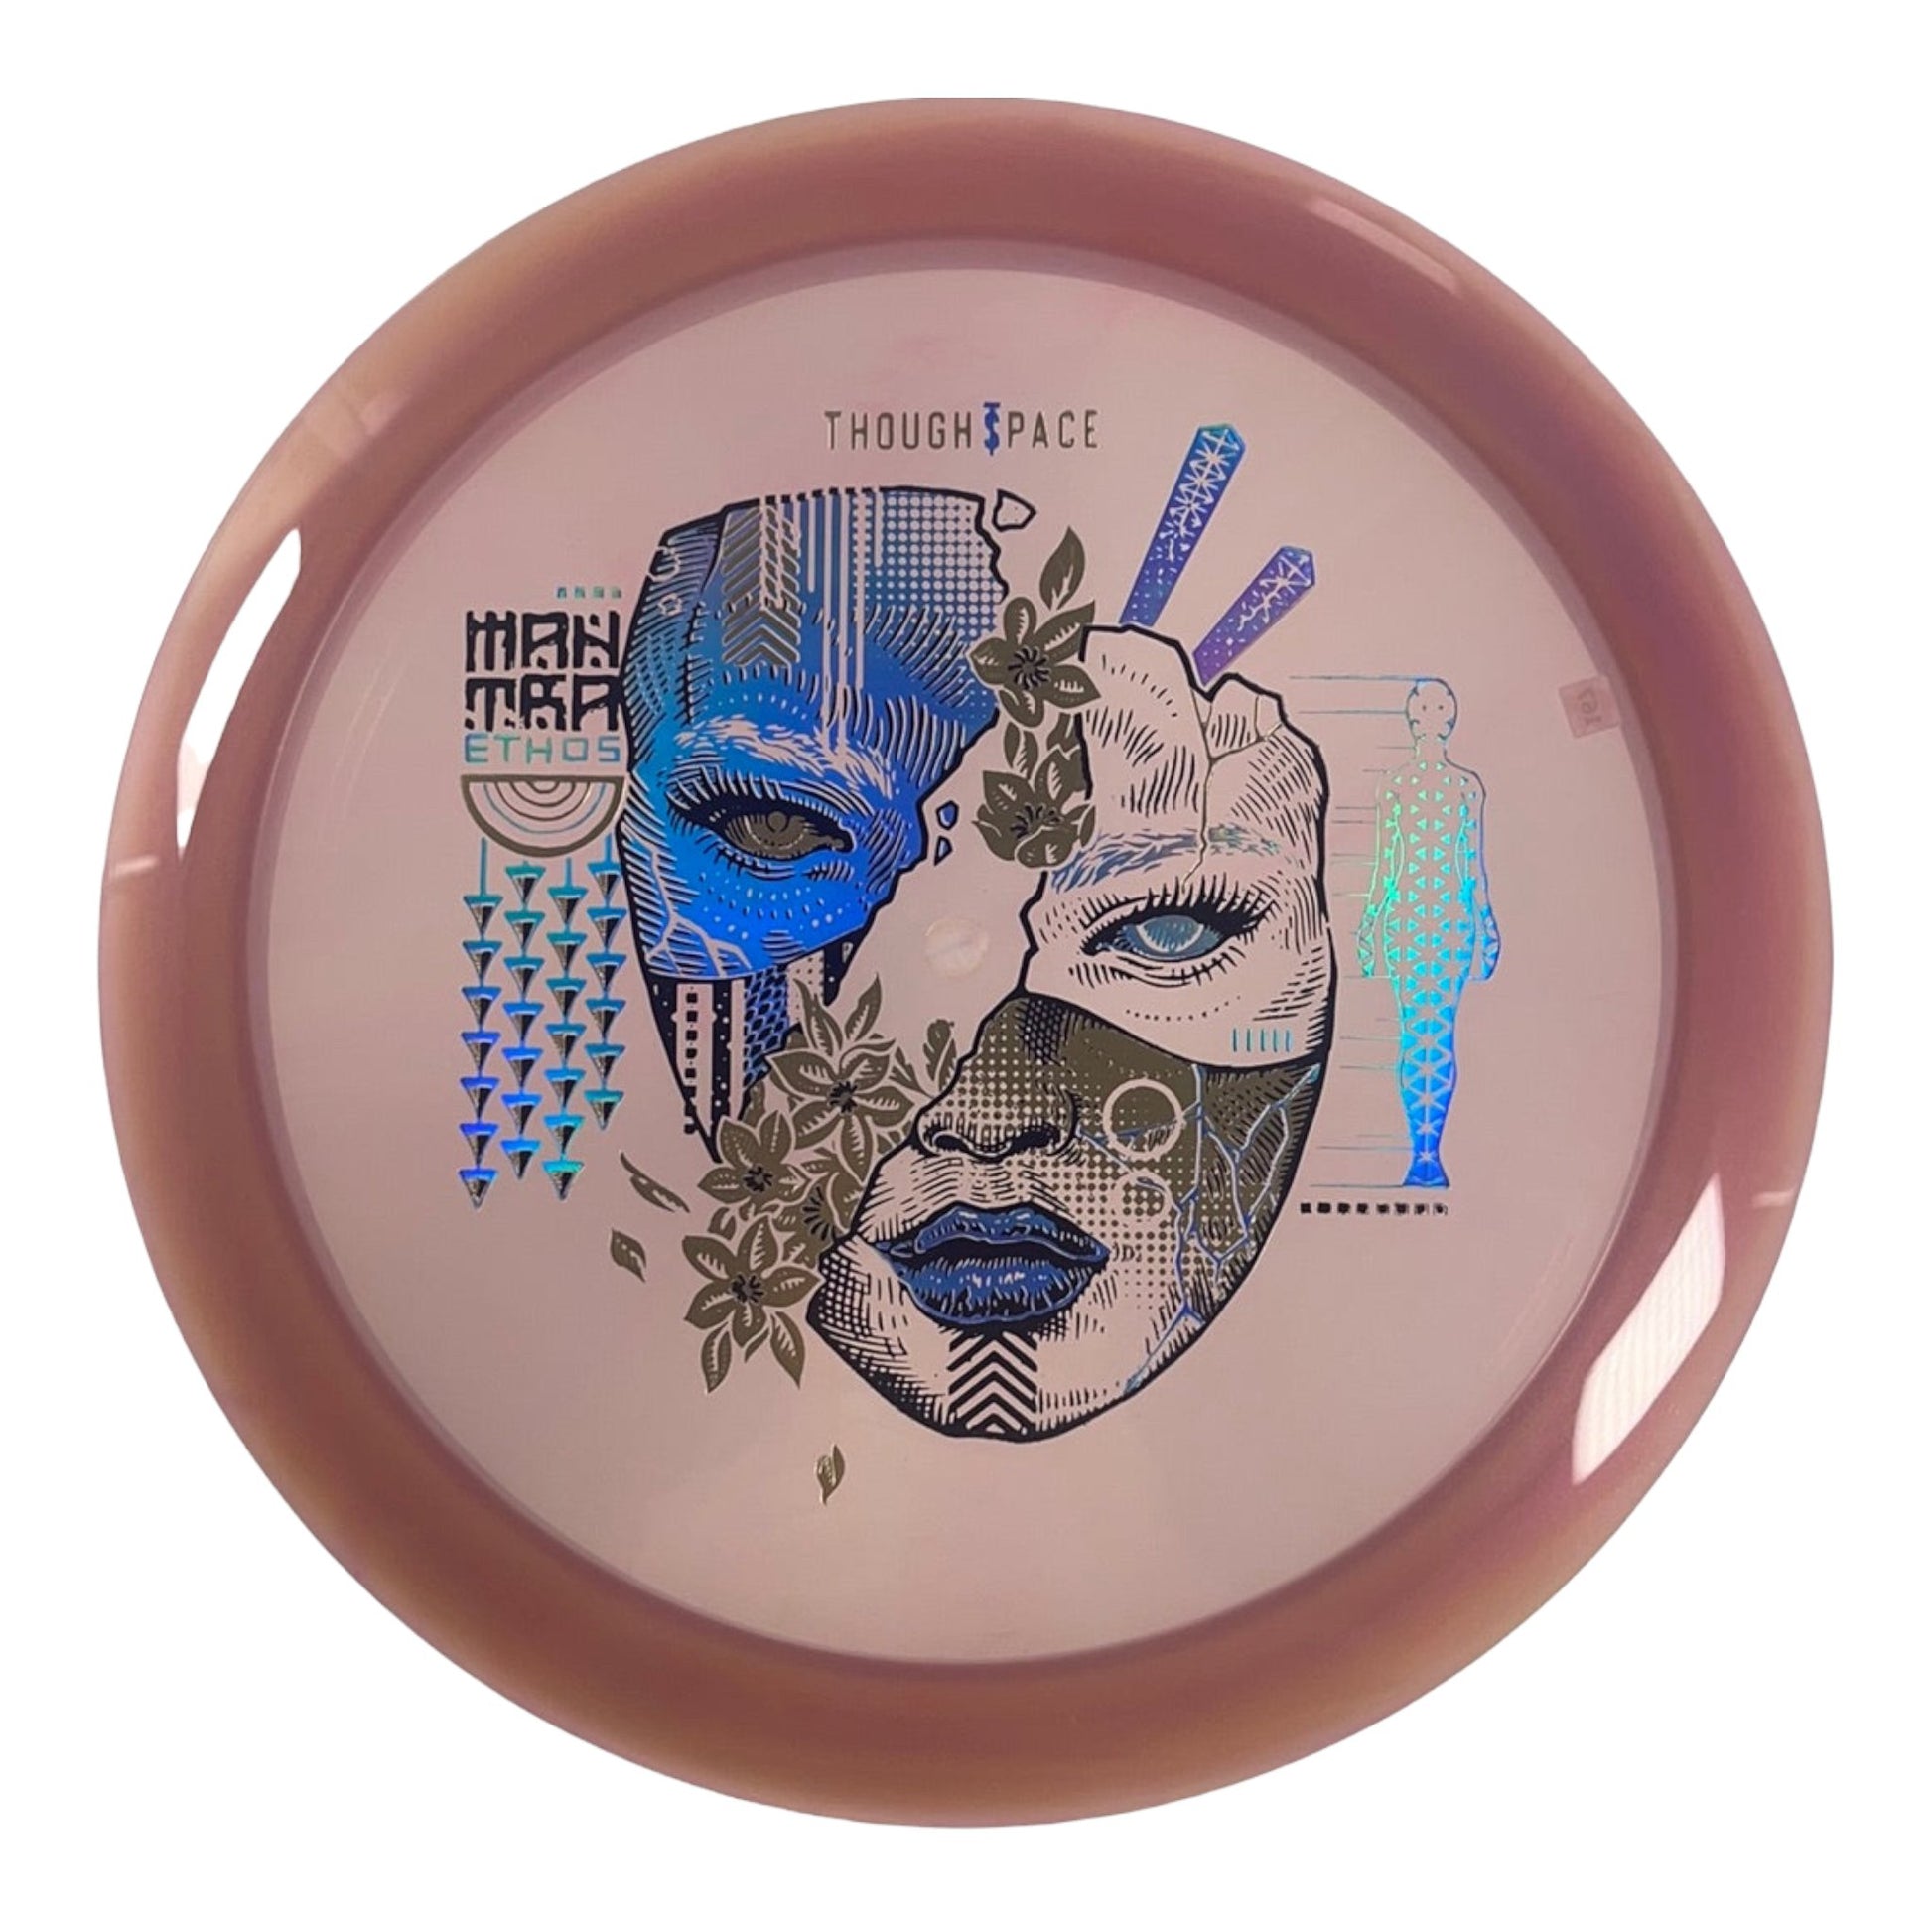 Thought Space Athletics Mantra | Ethos | Pink/Blue Holo 167g Disc Golf